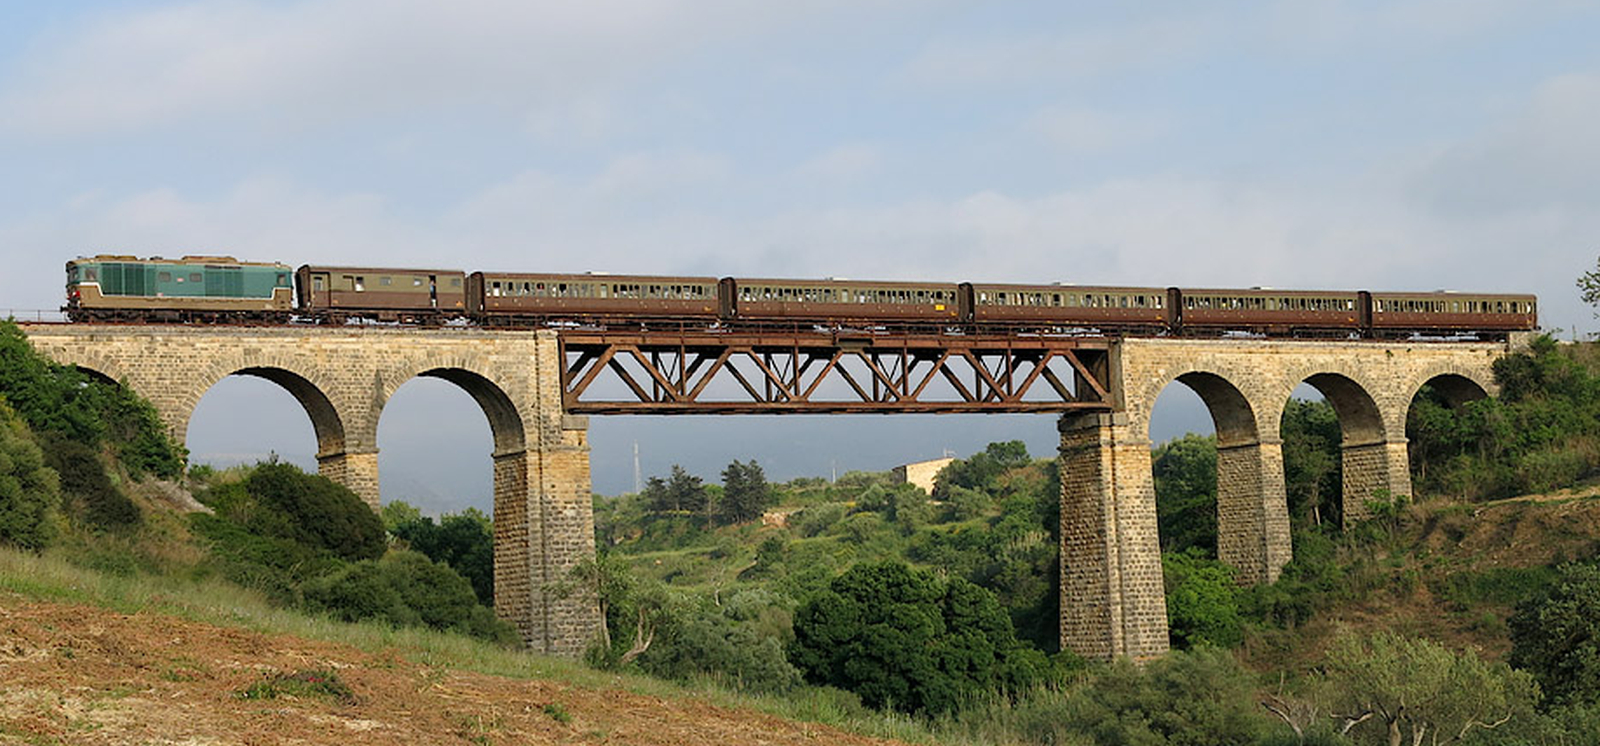 D.445.1034 with “Centoporte” carriages in May 2015 on the bridge over the Nocella between Carini and Partinico